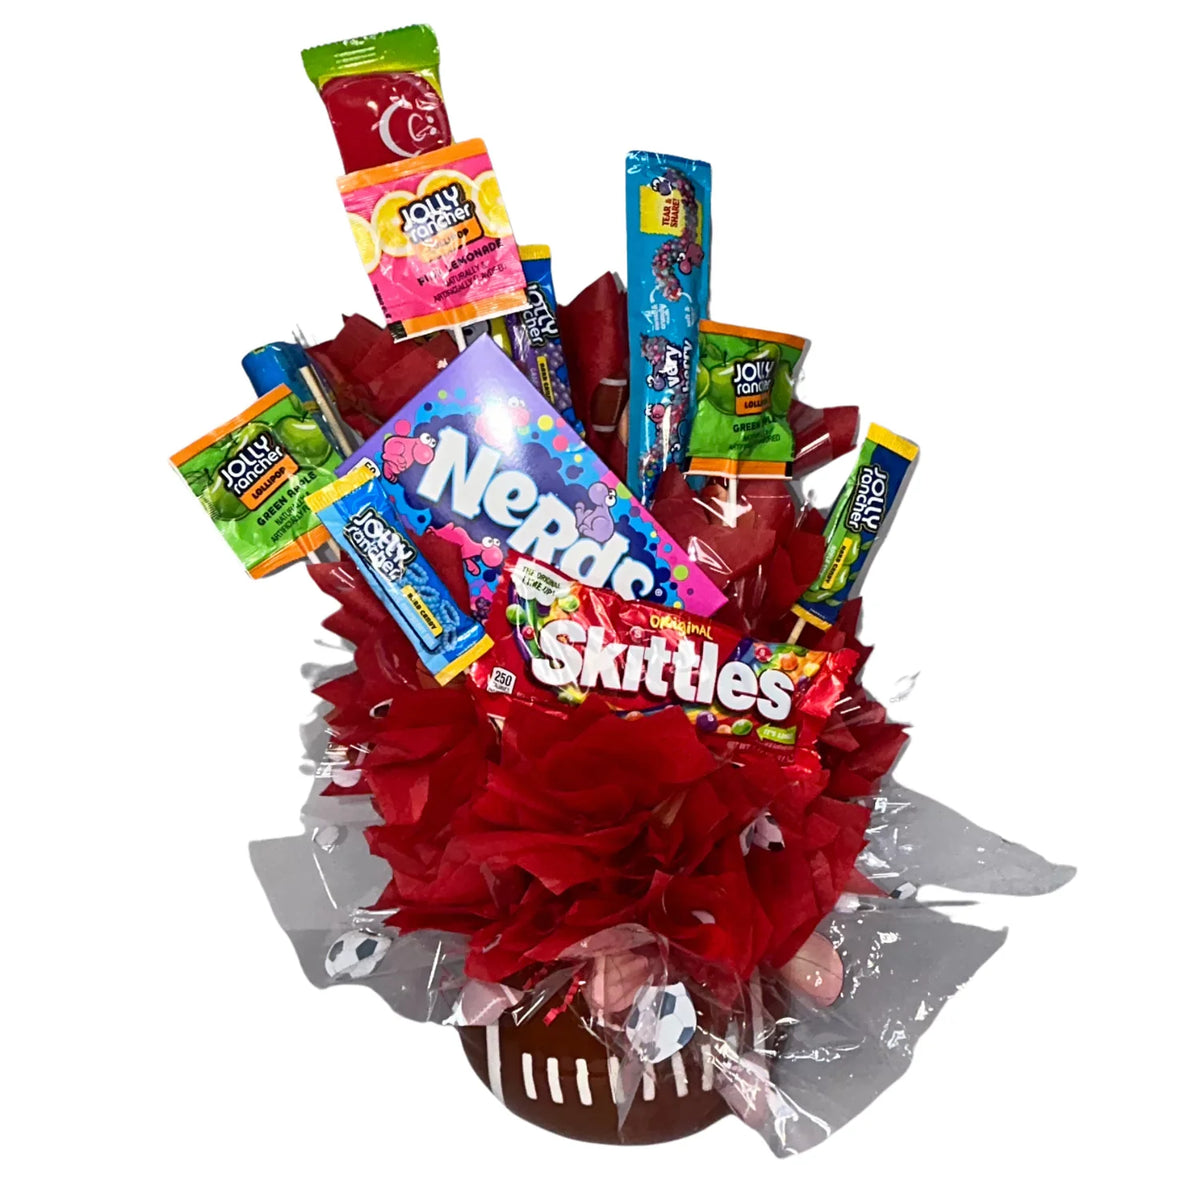 Fruit Flavored Candy Bouquet with Football Ceramic Sports Theme